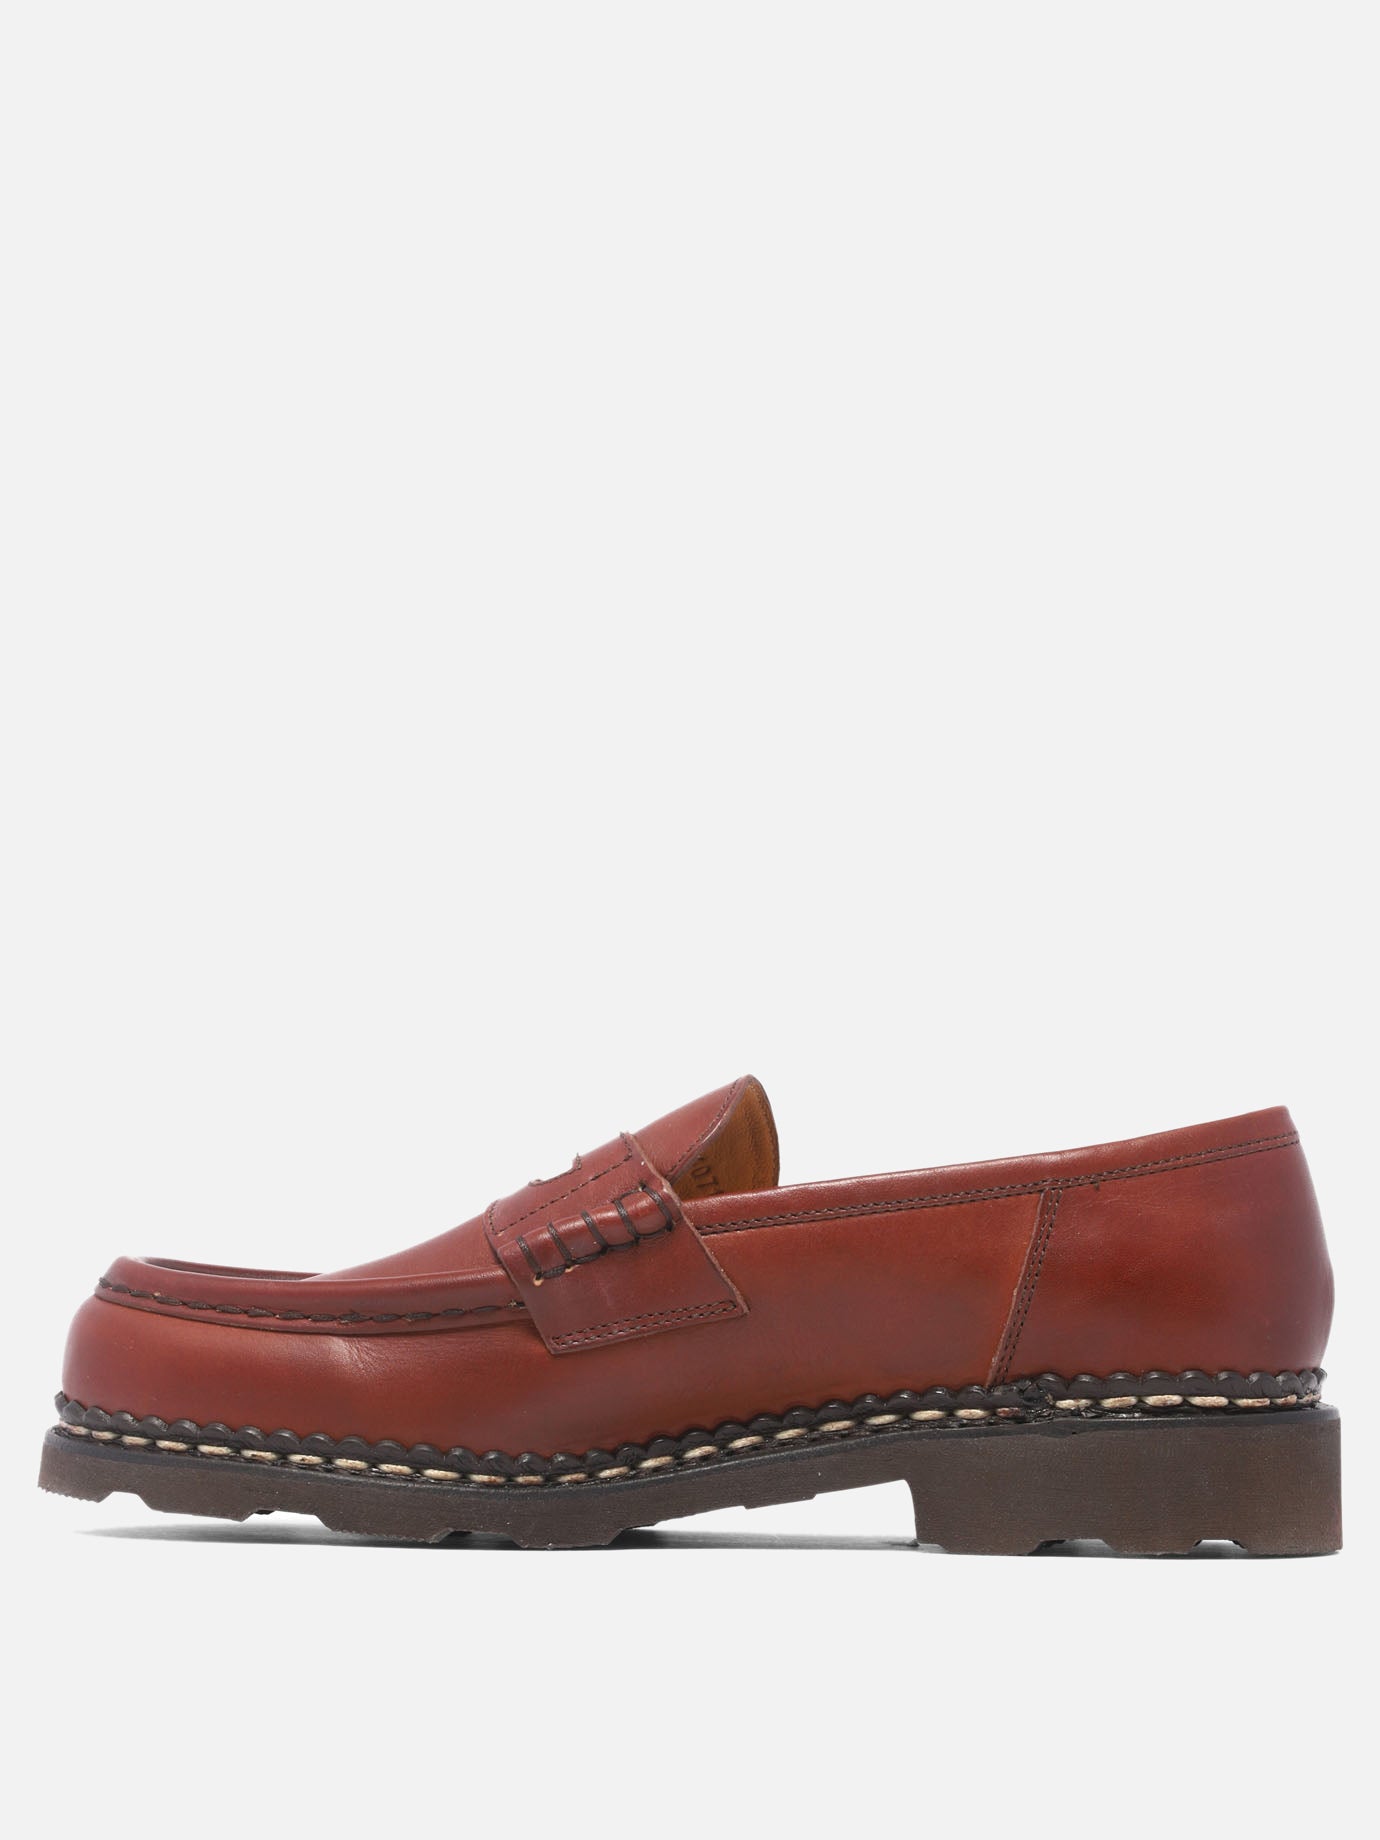 "Orsay" loafers